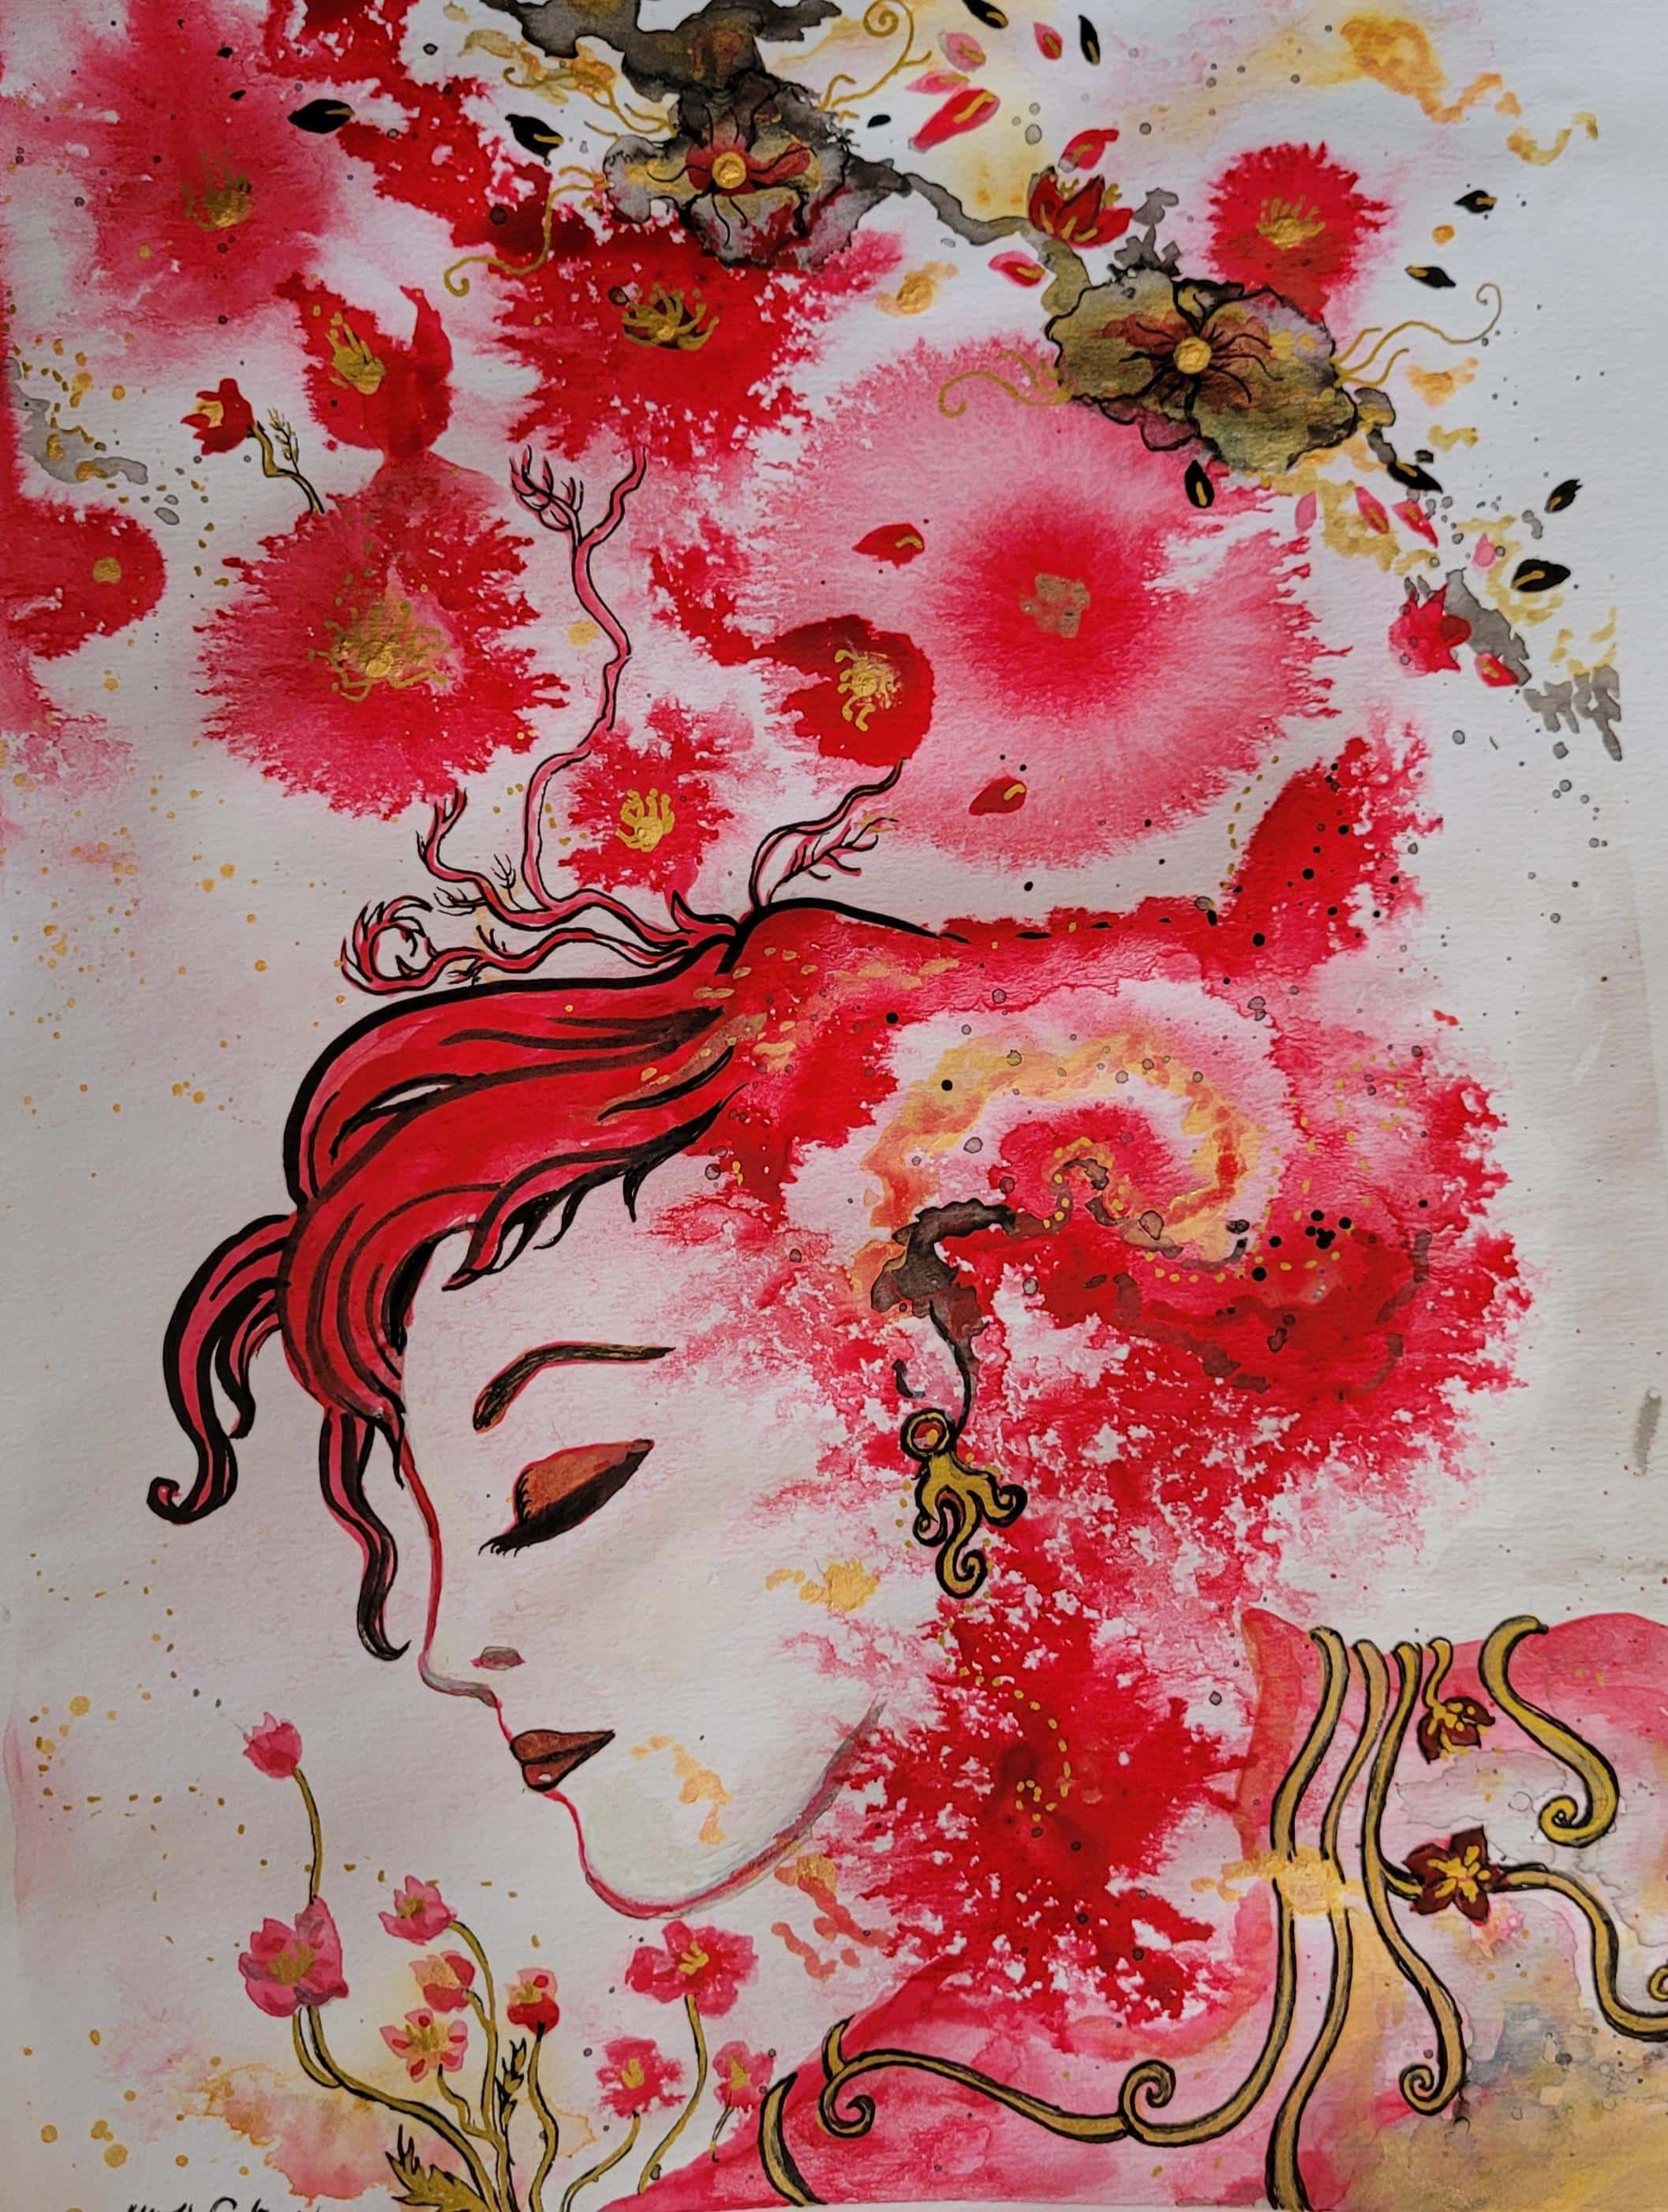 Brilliant Dreams of Red Watercolor, ink and metallic inks on watercolor  paper, 9 by 12